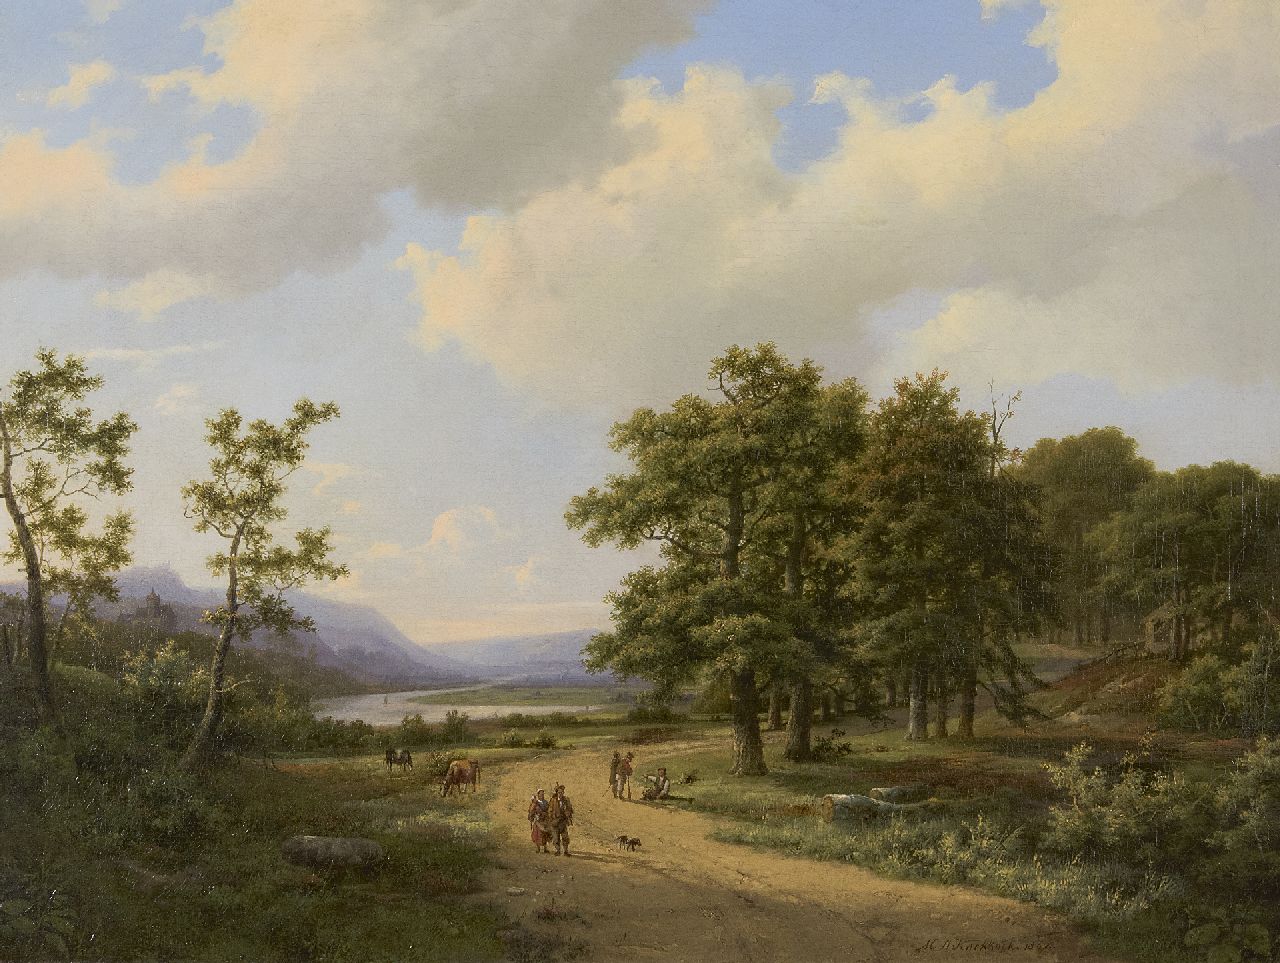 Koekkoek I M.A.  | Marinus Adrianus Koekkoek I, Landscape with trees and figures on a country road, oil on canvas 47.0 x 62.0 cm, signed right of the centre and dated 1862